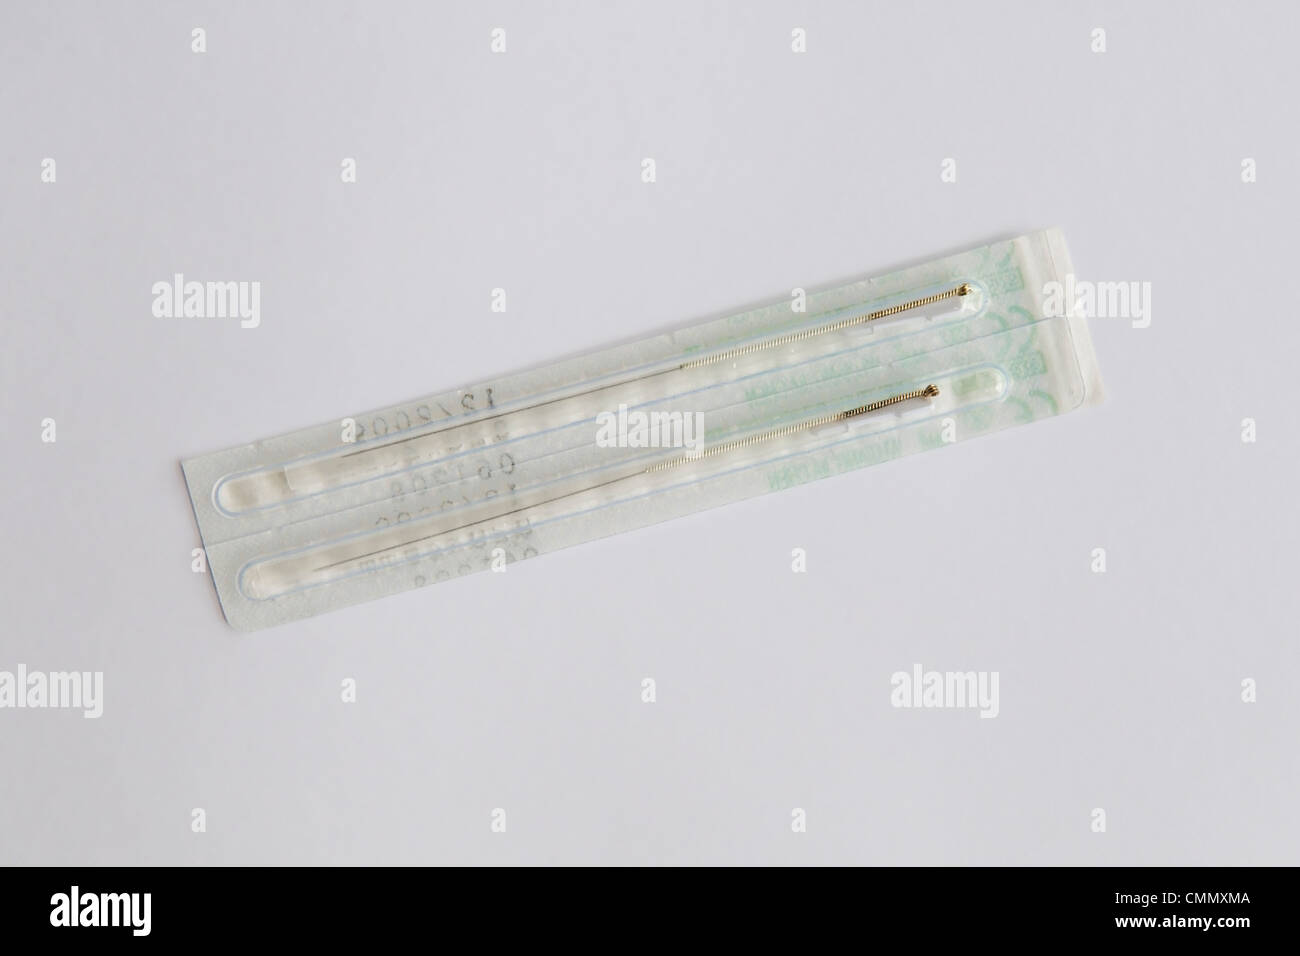 Acupuncture needles in packets taken against a plain white background Stock Photo